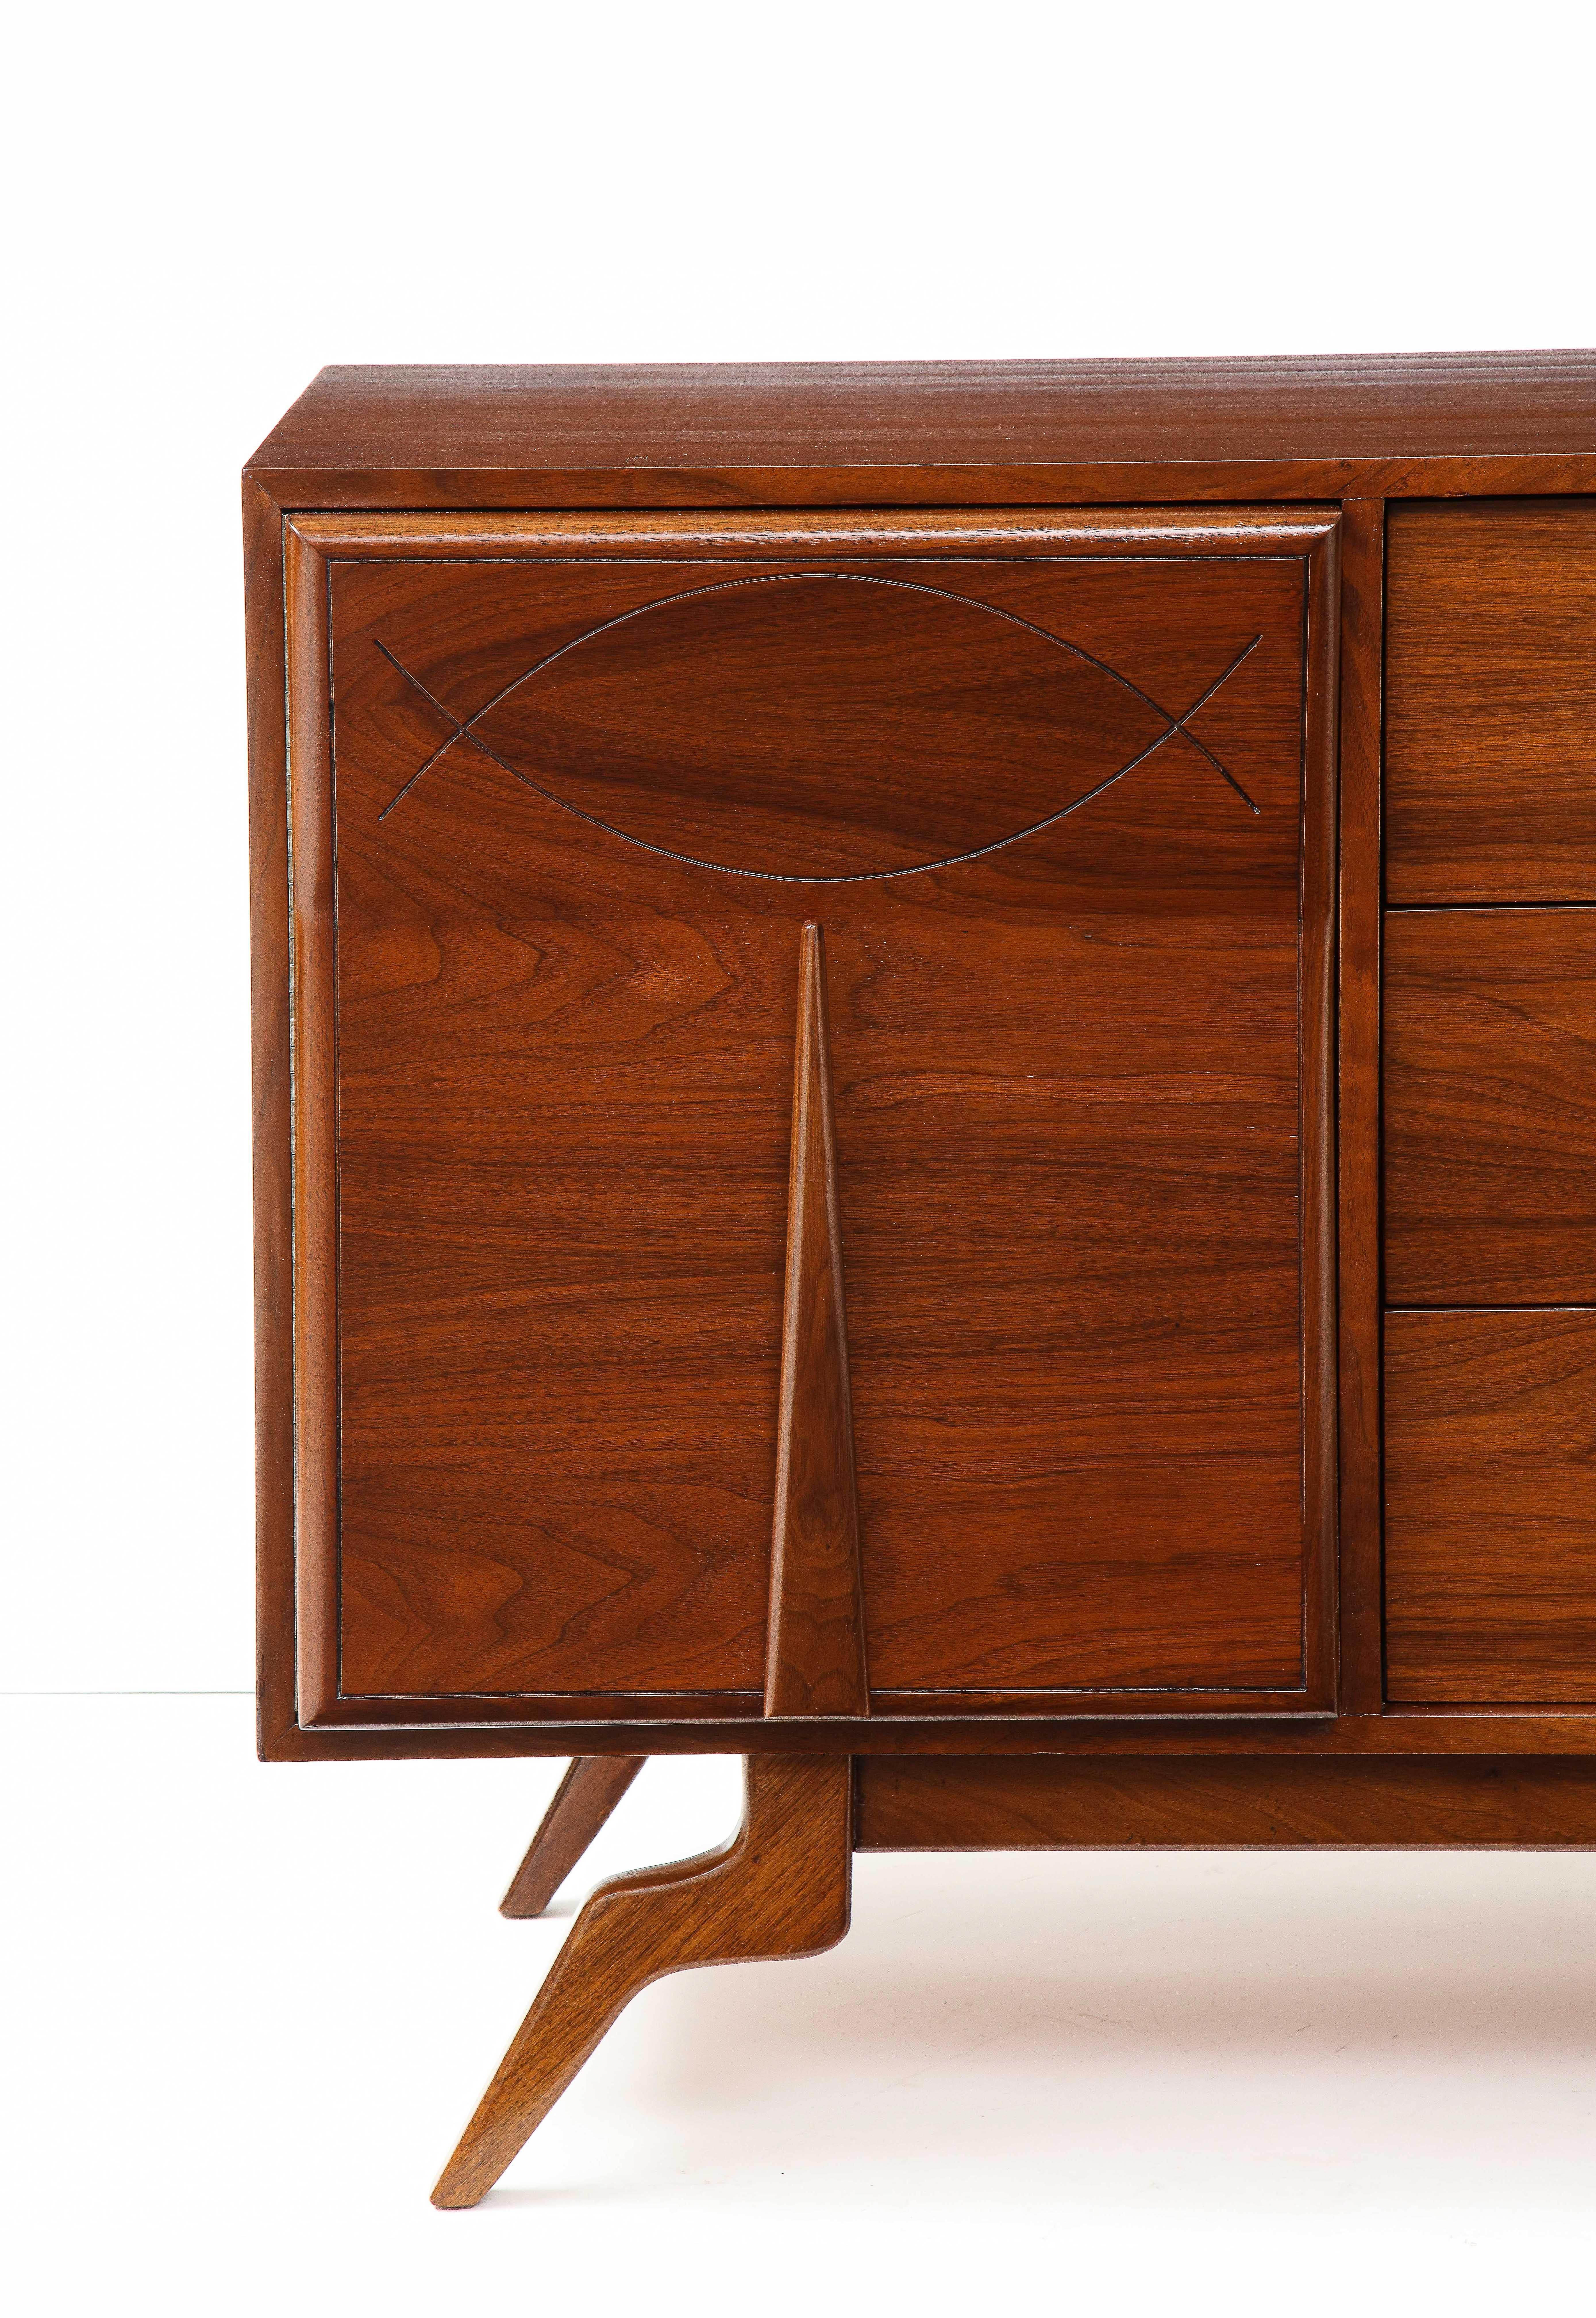 Stunning 1960's Mid-Century Modern sculptural walnut dresser credenza, with fish motif detail and wood and brass long handles, fully restored.